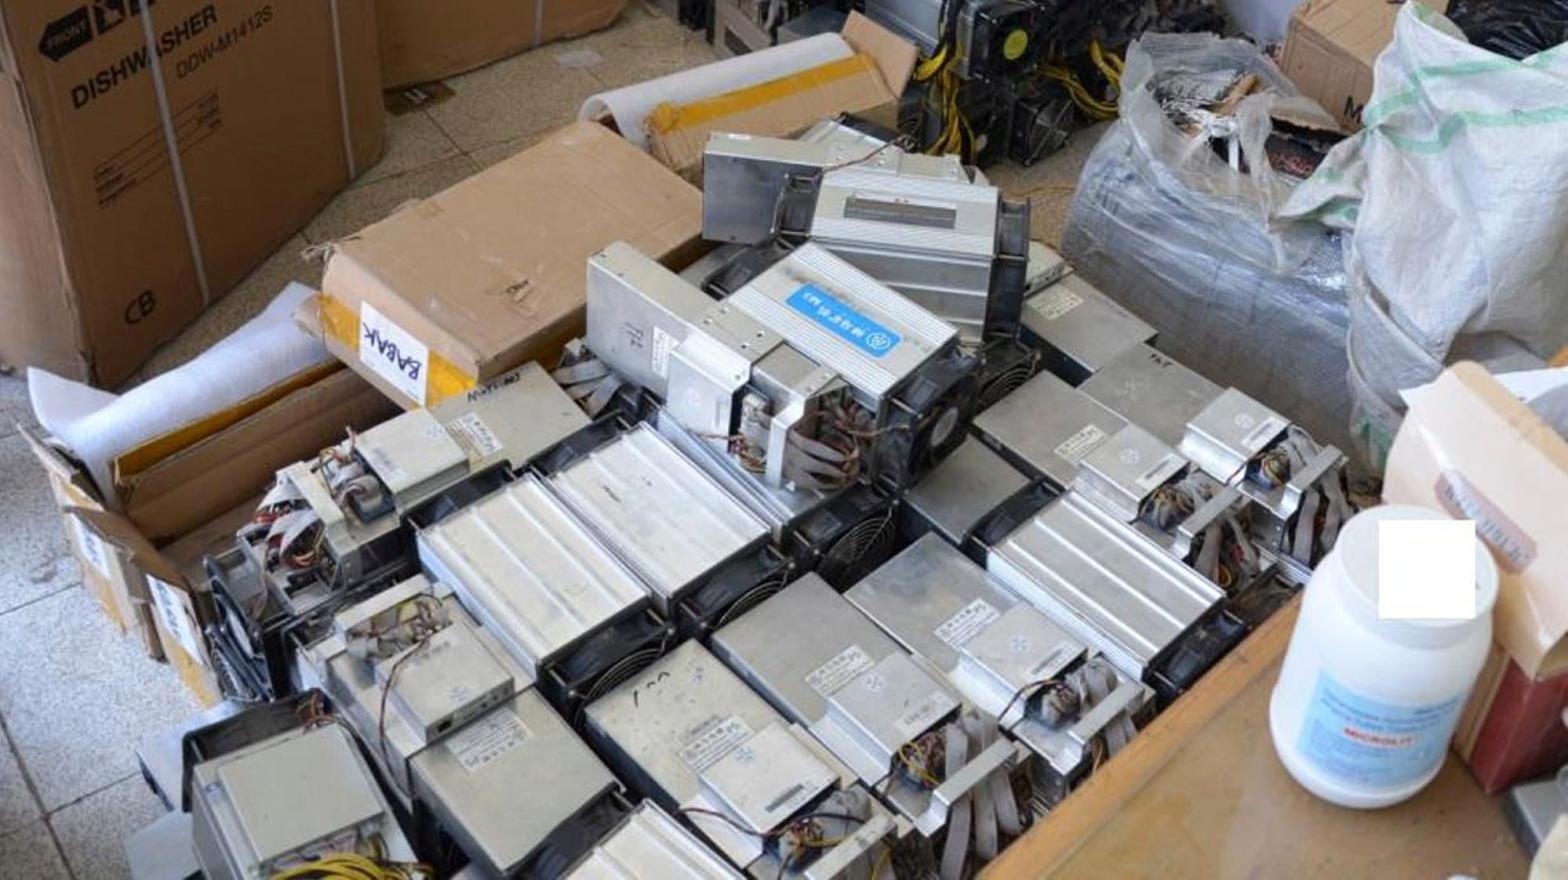 Boxes of machinery used in mining operations that were confiscated by police in Nazarabad, Iran. (Photo: Iran Police News Agency, AP)